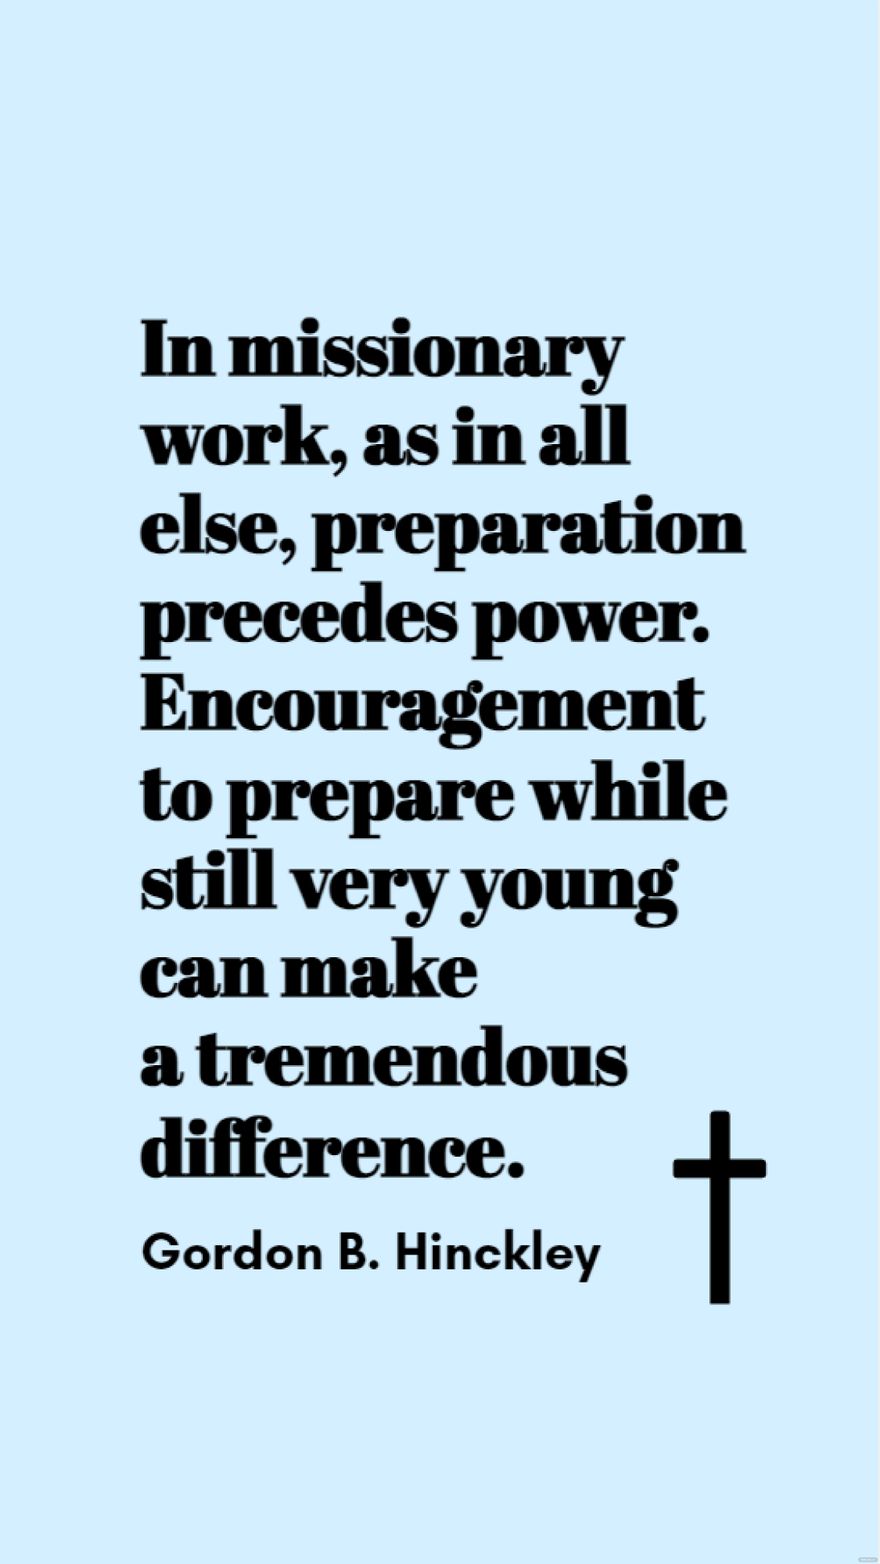 Gordon B. Hinckley - In missionary work, as in all else, preparation precedes power. Encouragement to prepare while still very young can make a tremendous difference.